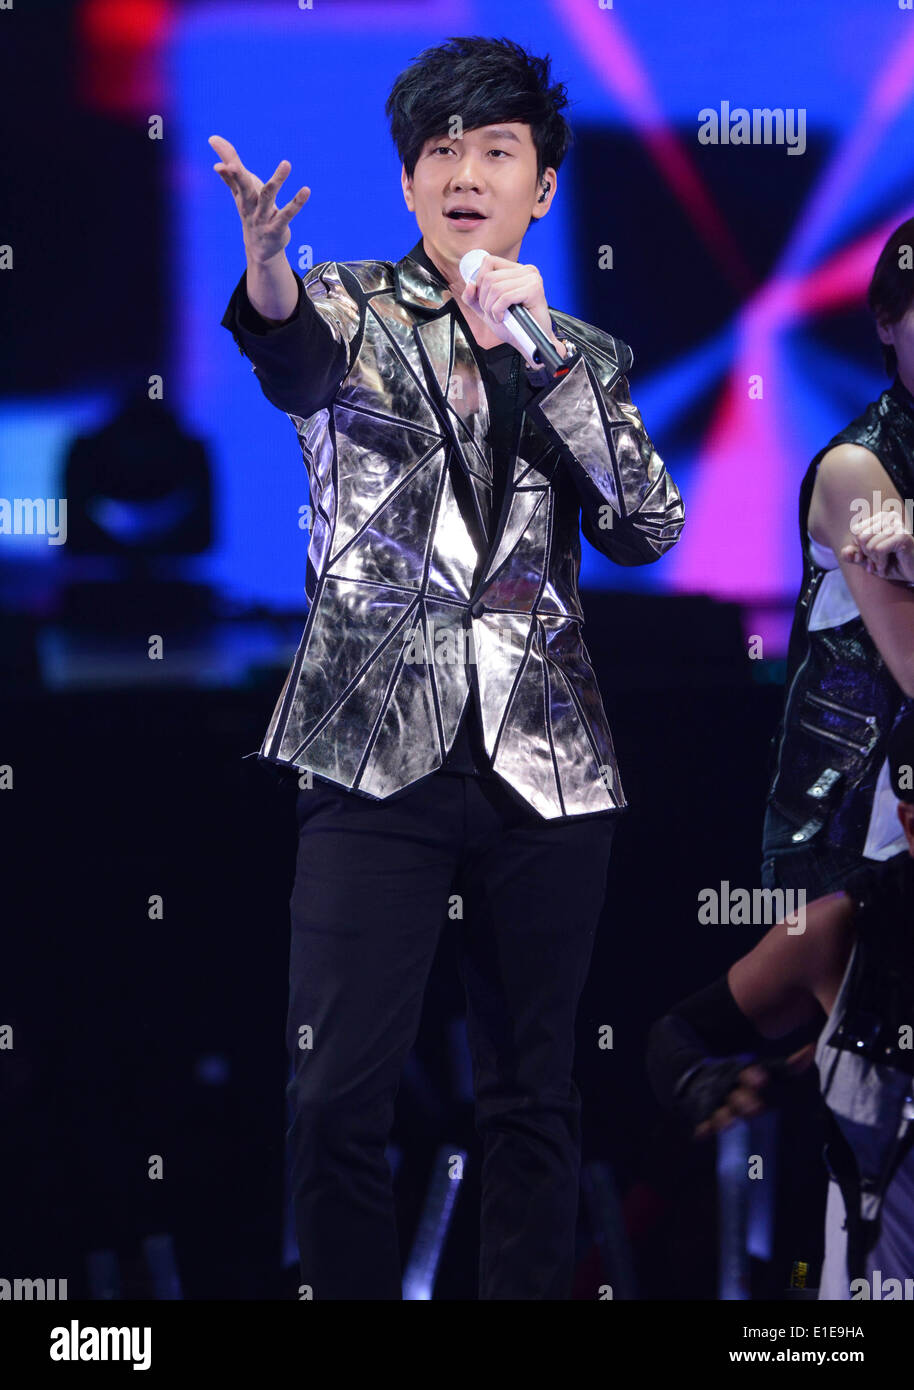 Taipei. 2nd June, 2014. Singer JJ Lin performs during the awarding ceremony of 2014 hito Pop Music in Taipei, southeast China's Taiwan, June 1, 2014. © Xinhua/Alamy Live News Stock Photo